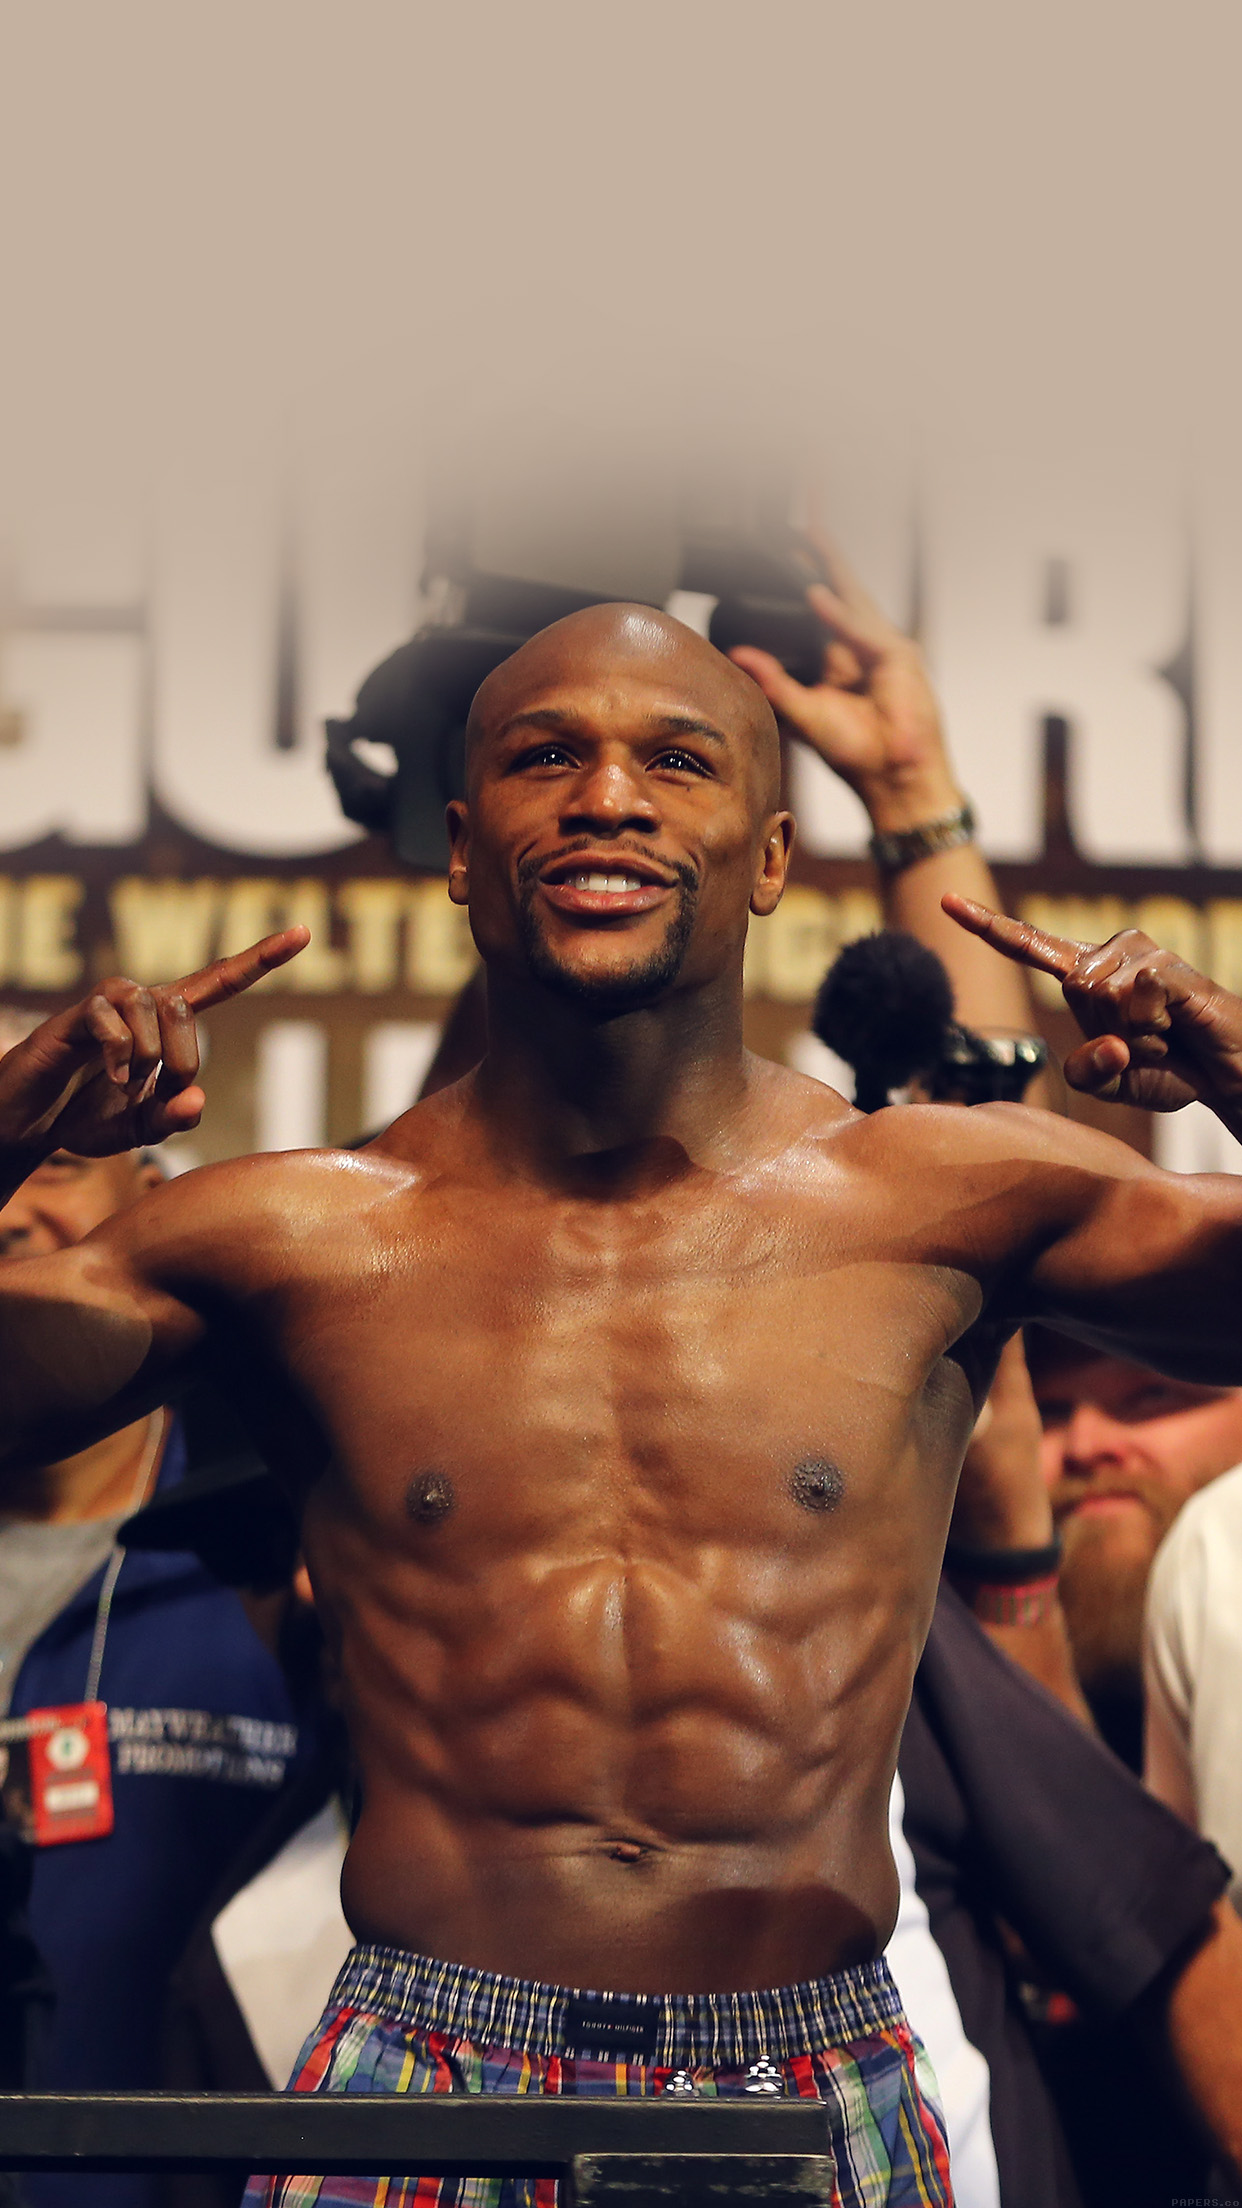 mayweather wallpaper hd,barechested,bodybuilder,bodybuilding,muscle,fitness professional